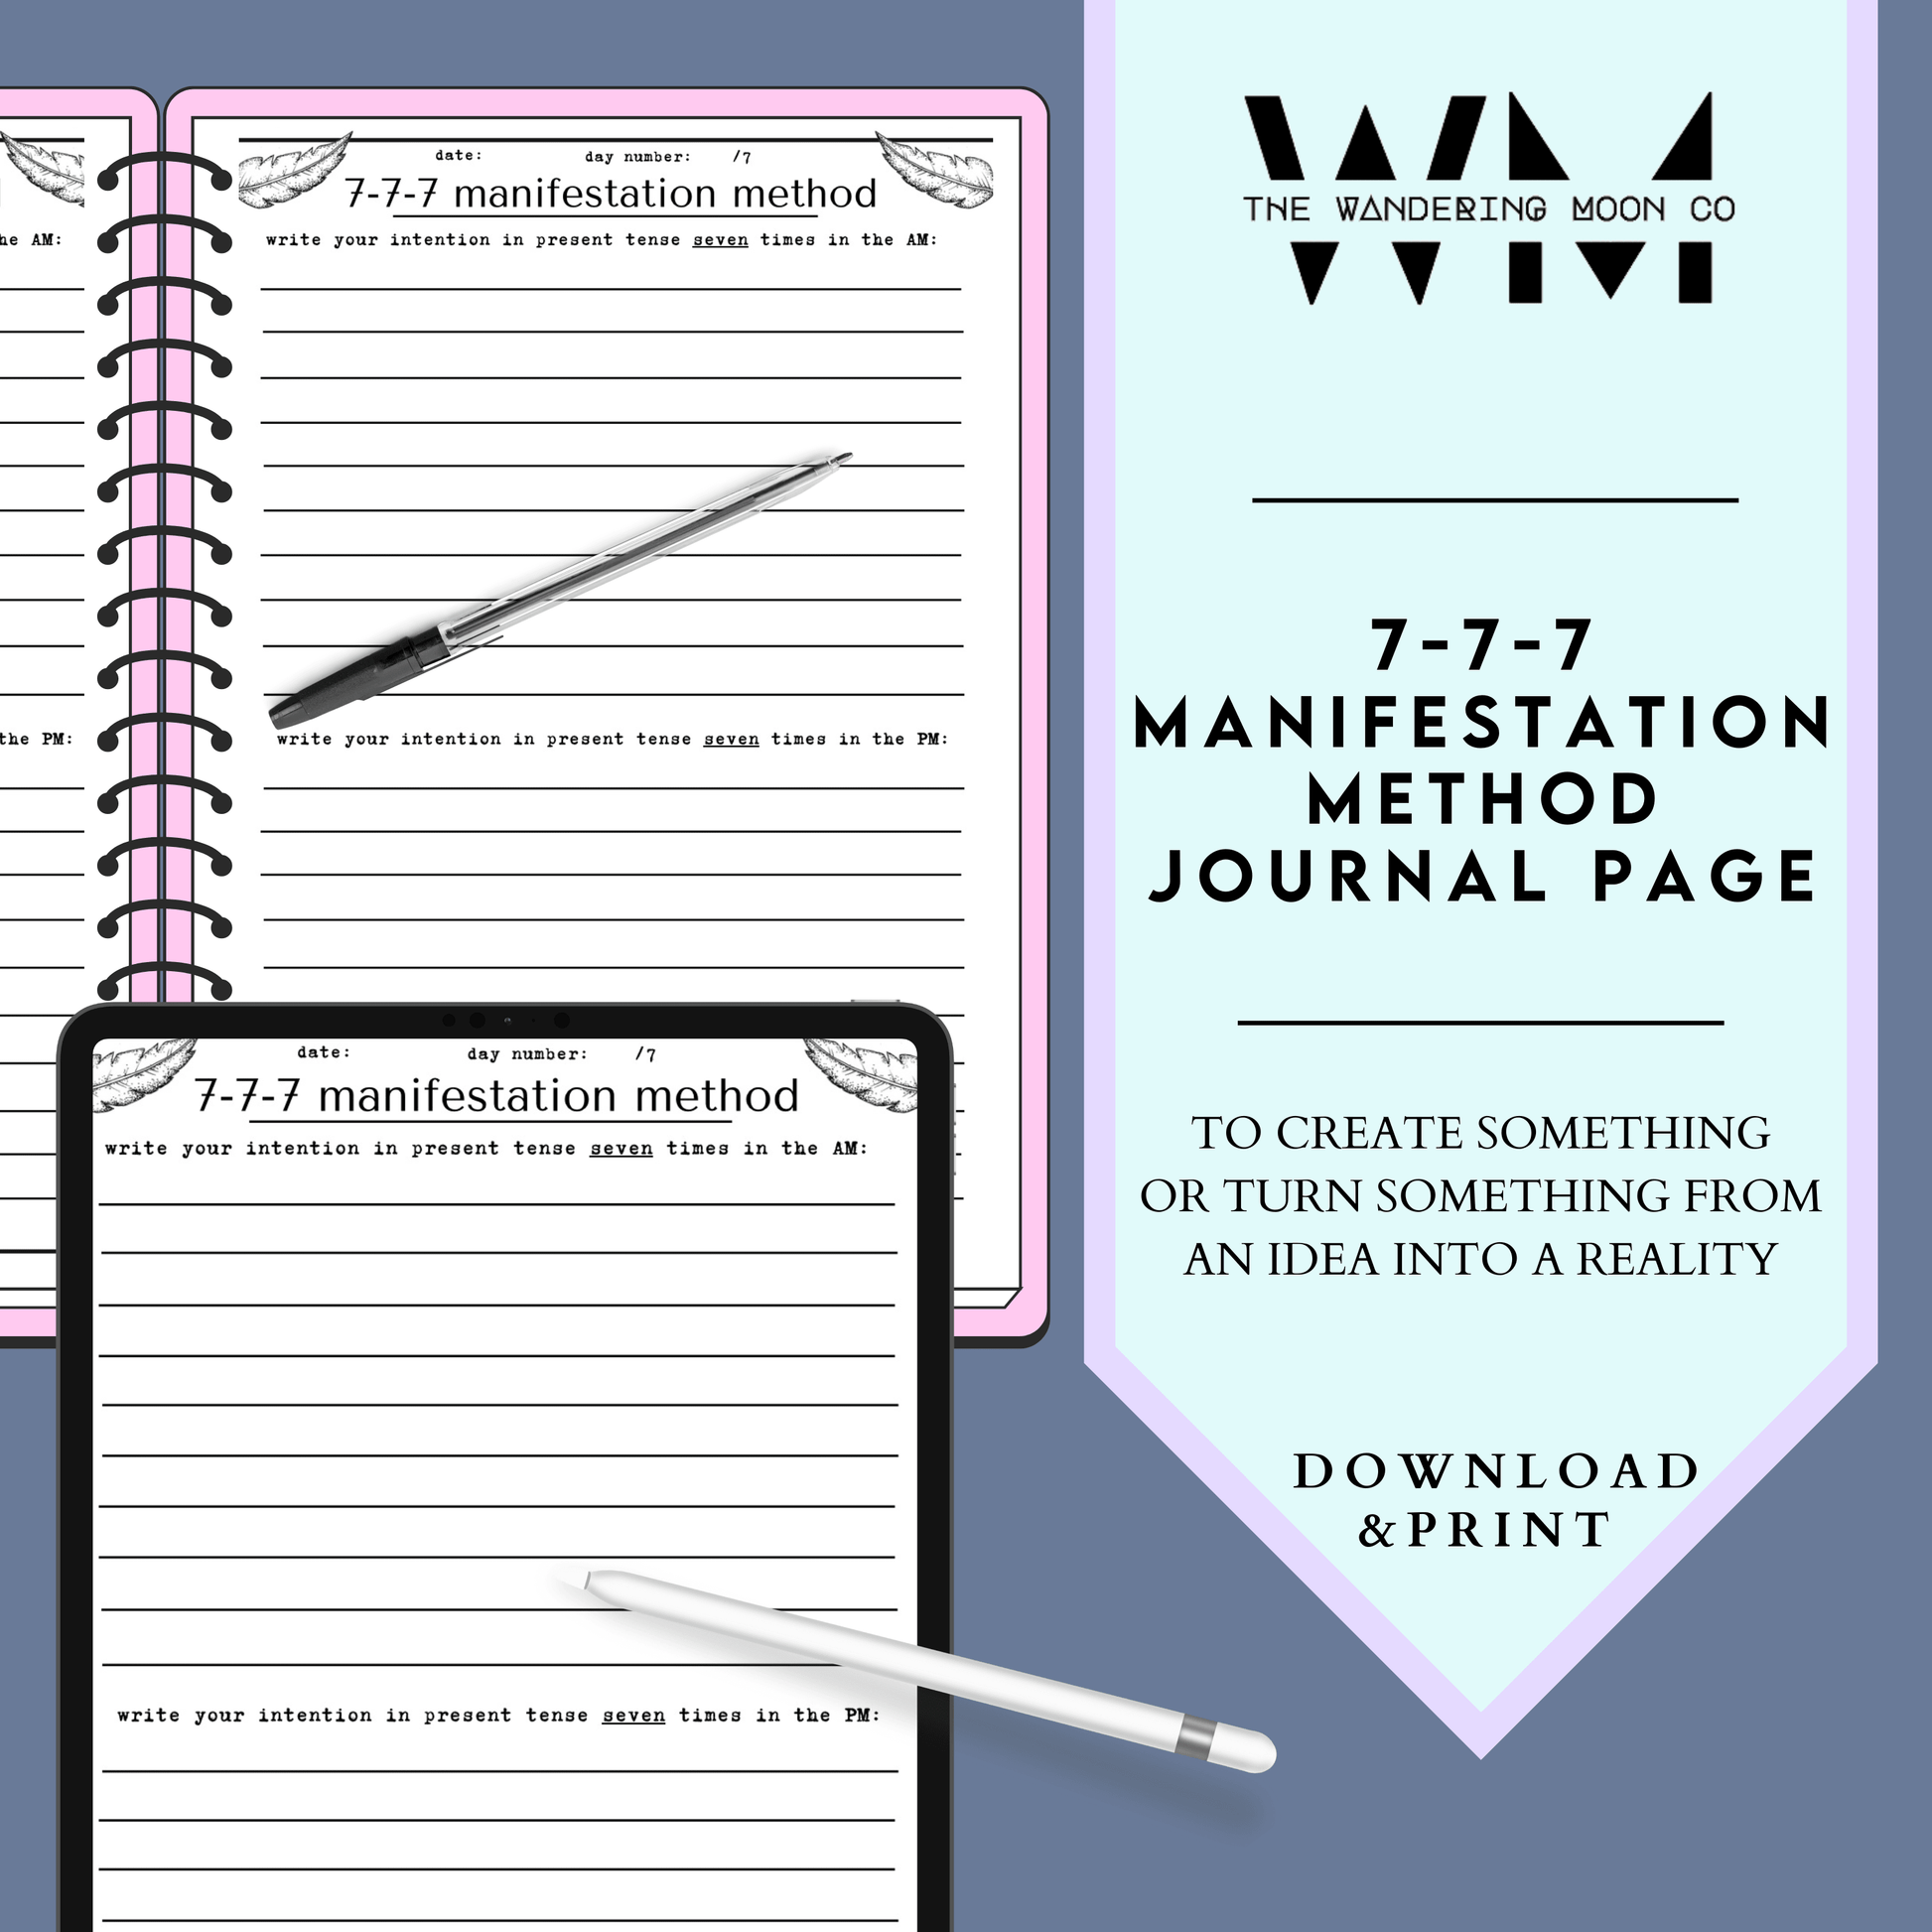 digital representation of the 777 manifestation journal page in black and white 